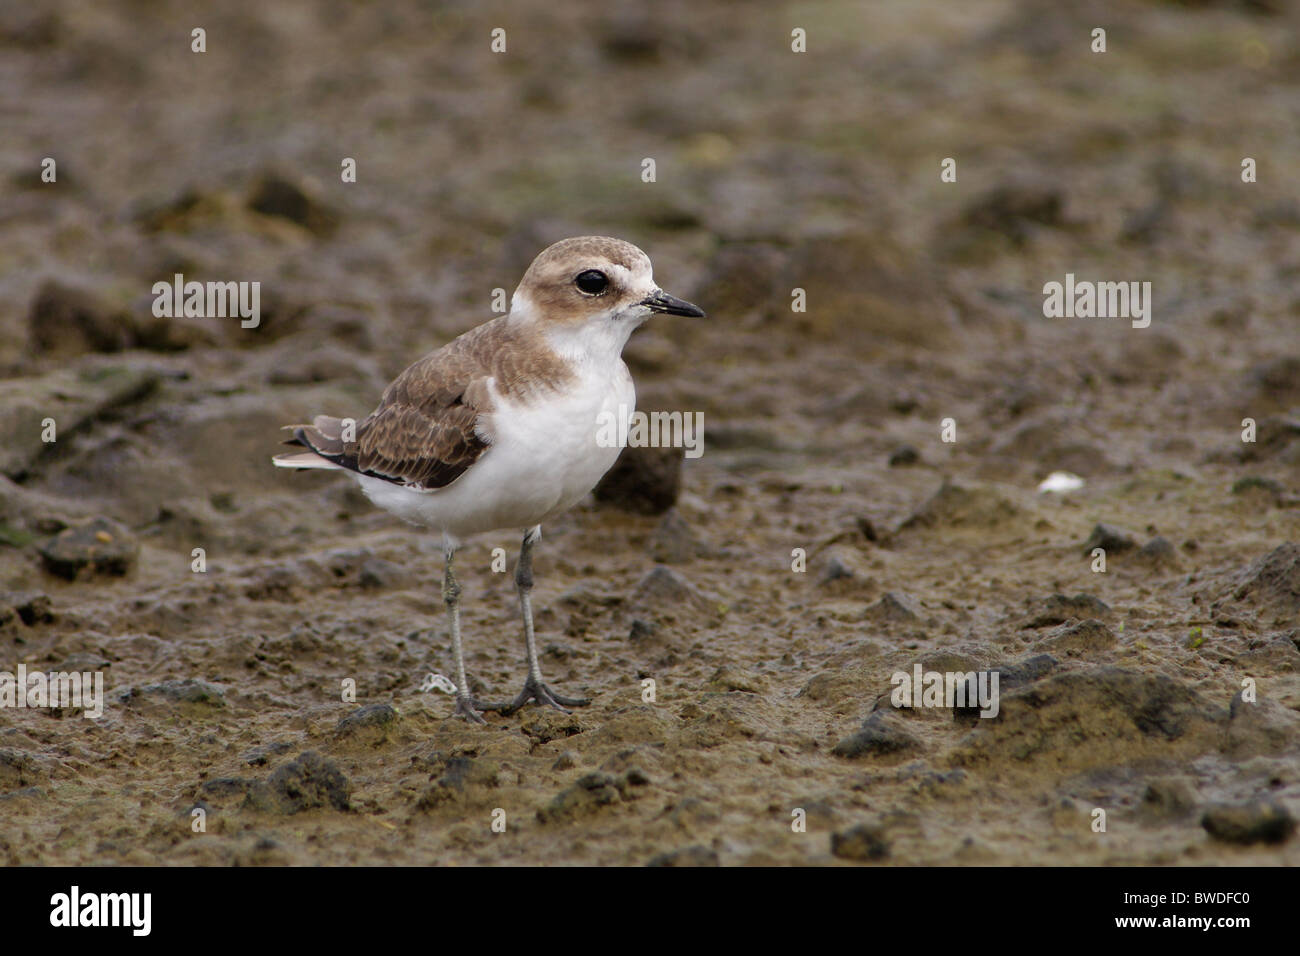 Kentish Plover or Snowy Plover alone looking for food Stock Photo